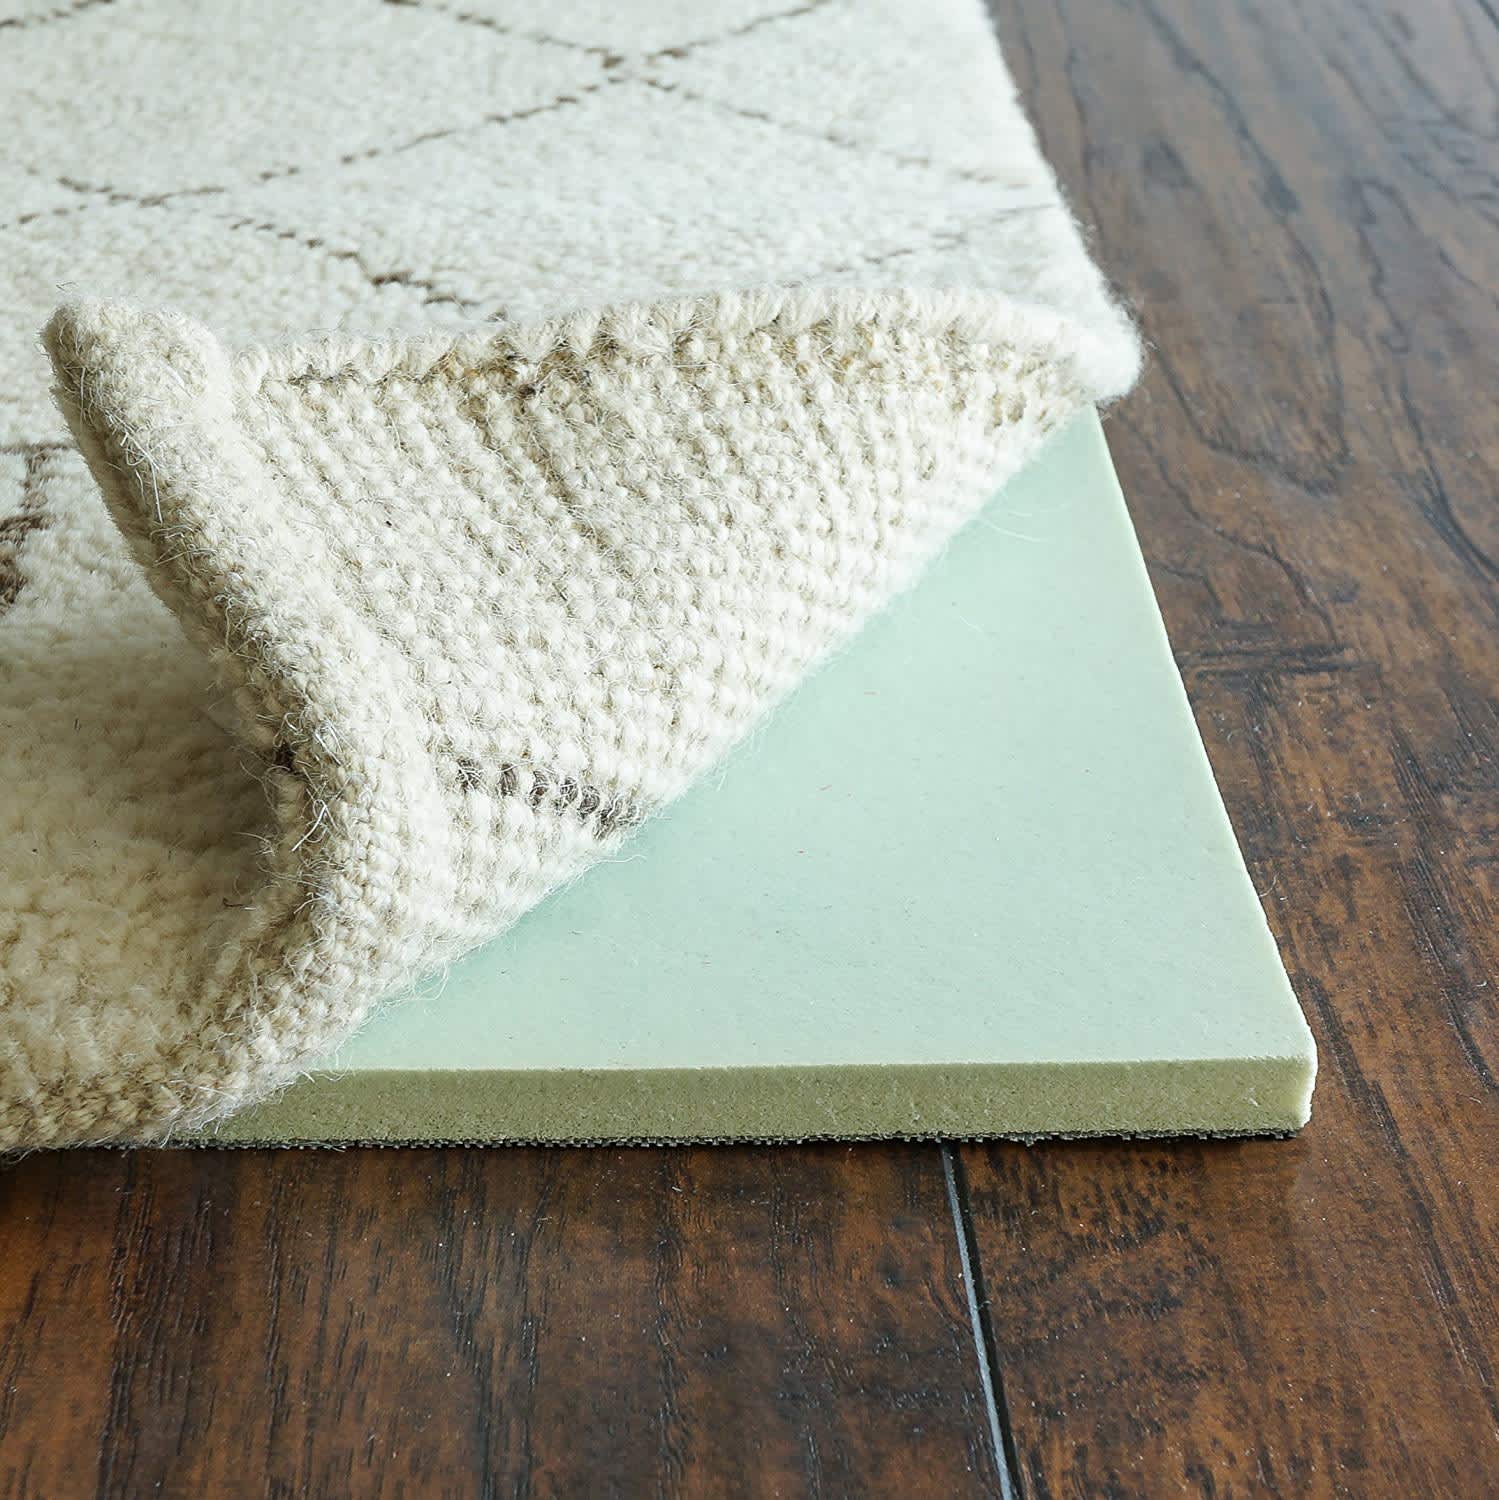 How to Keep Your Area Rugs From Buckling - DIY Beautify - Creating